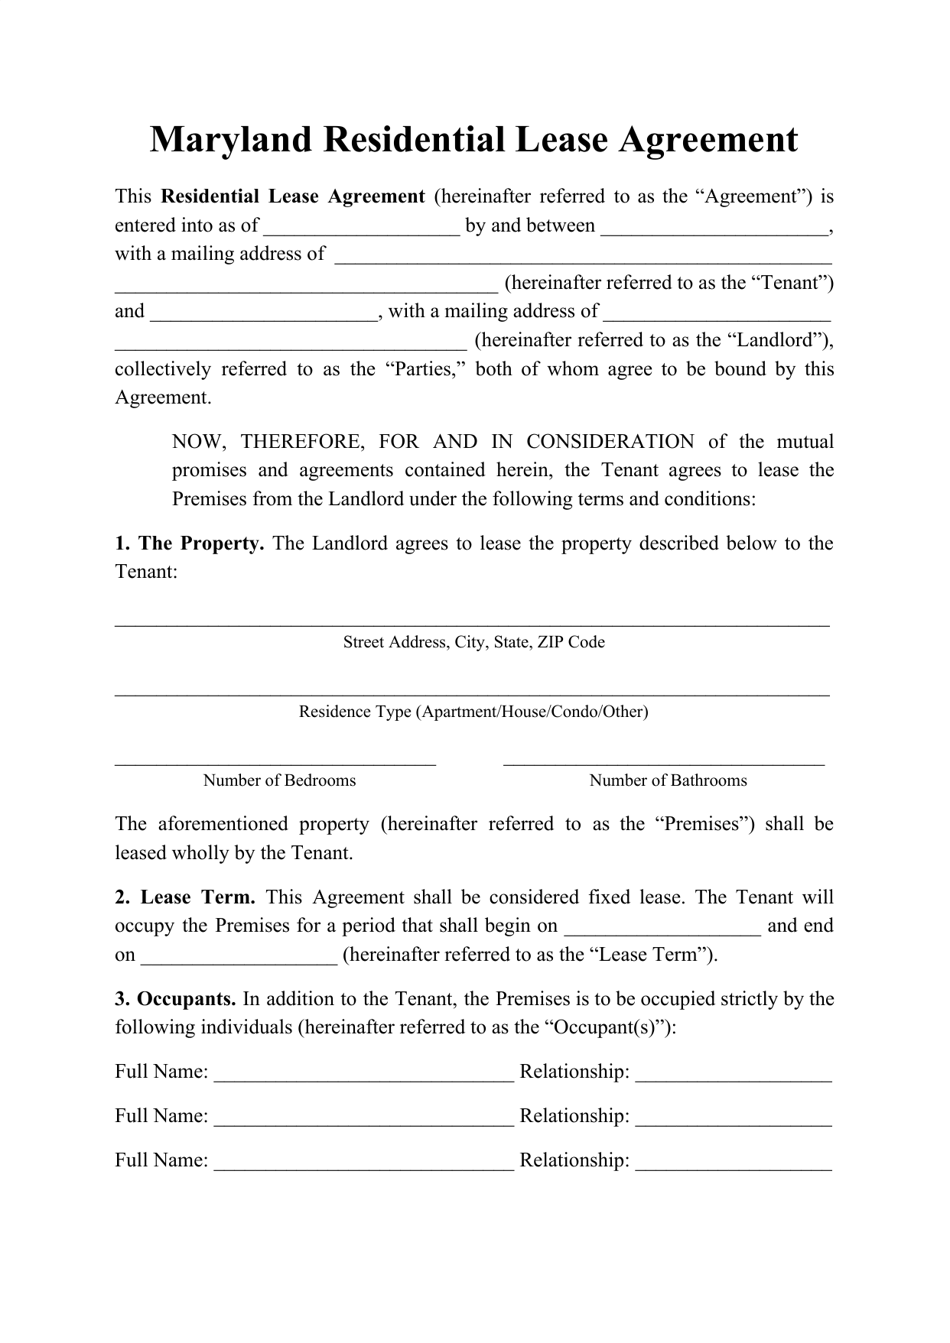 Residential Lease Agreement Template - Maryland, Page 1